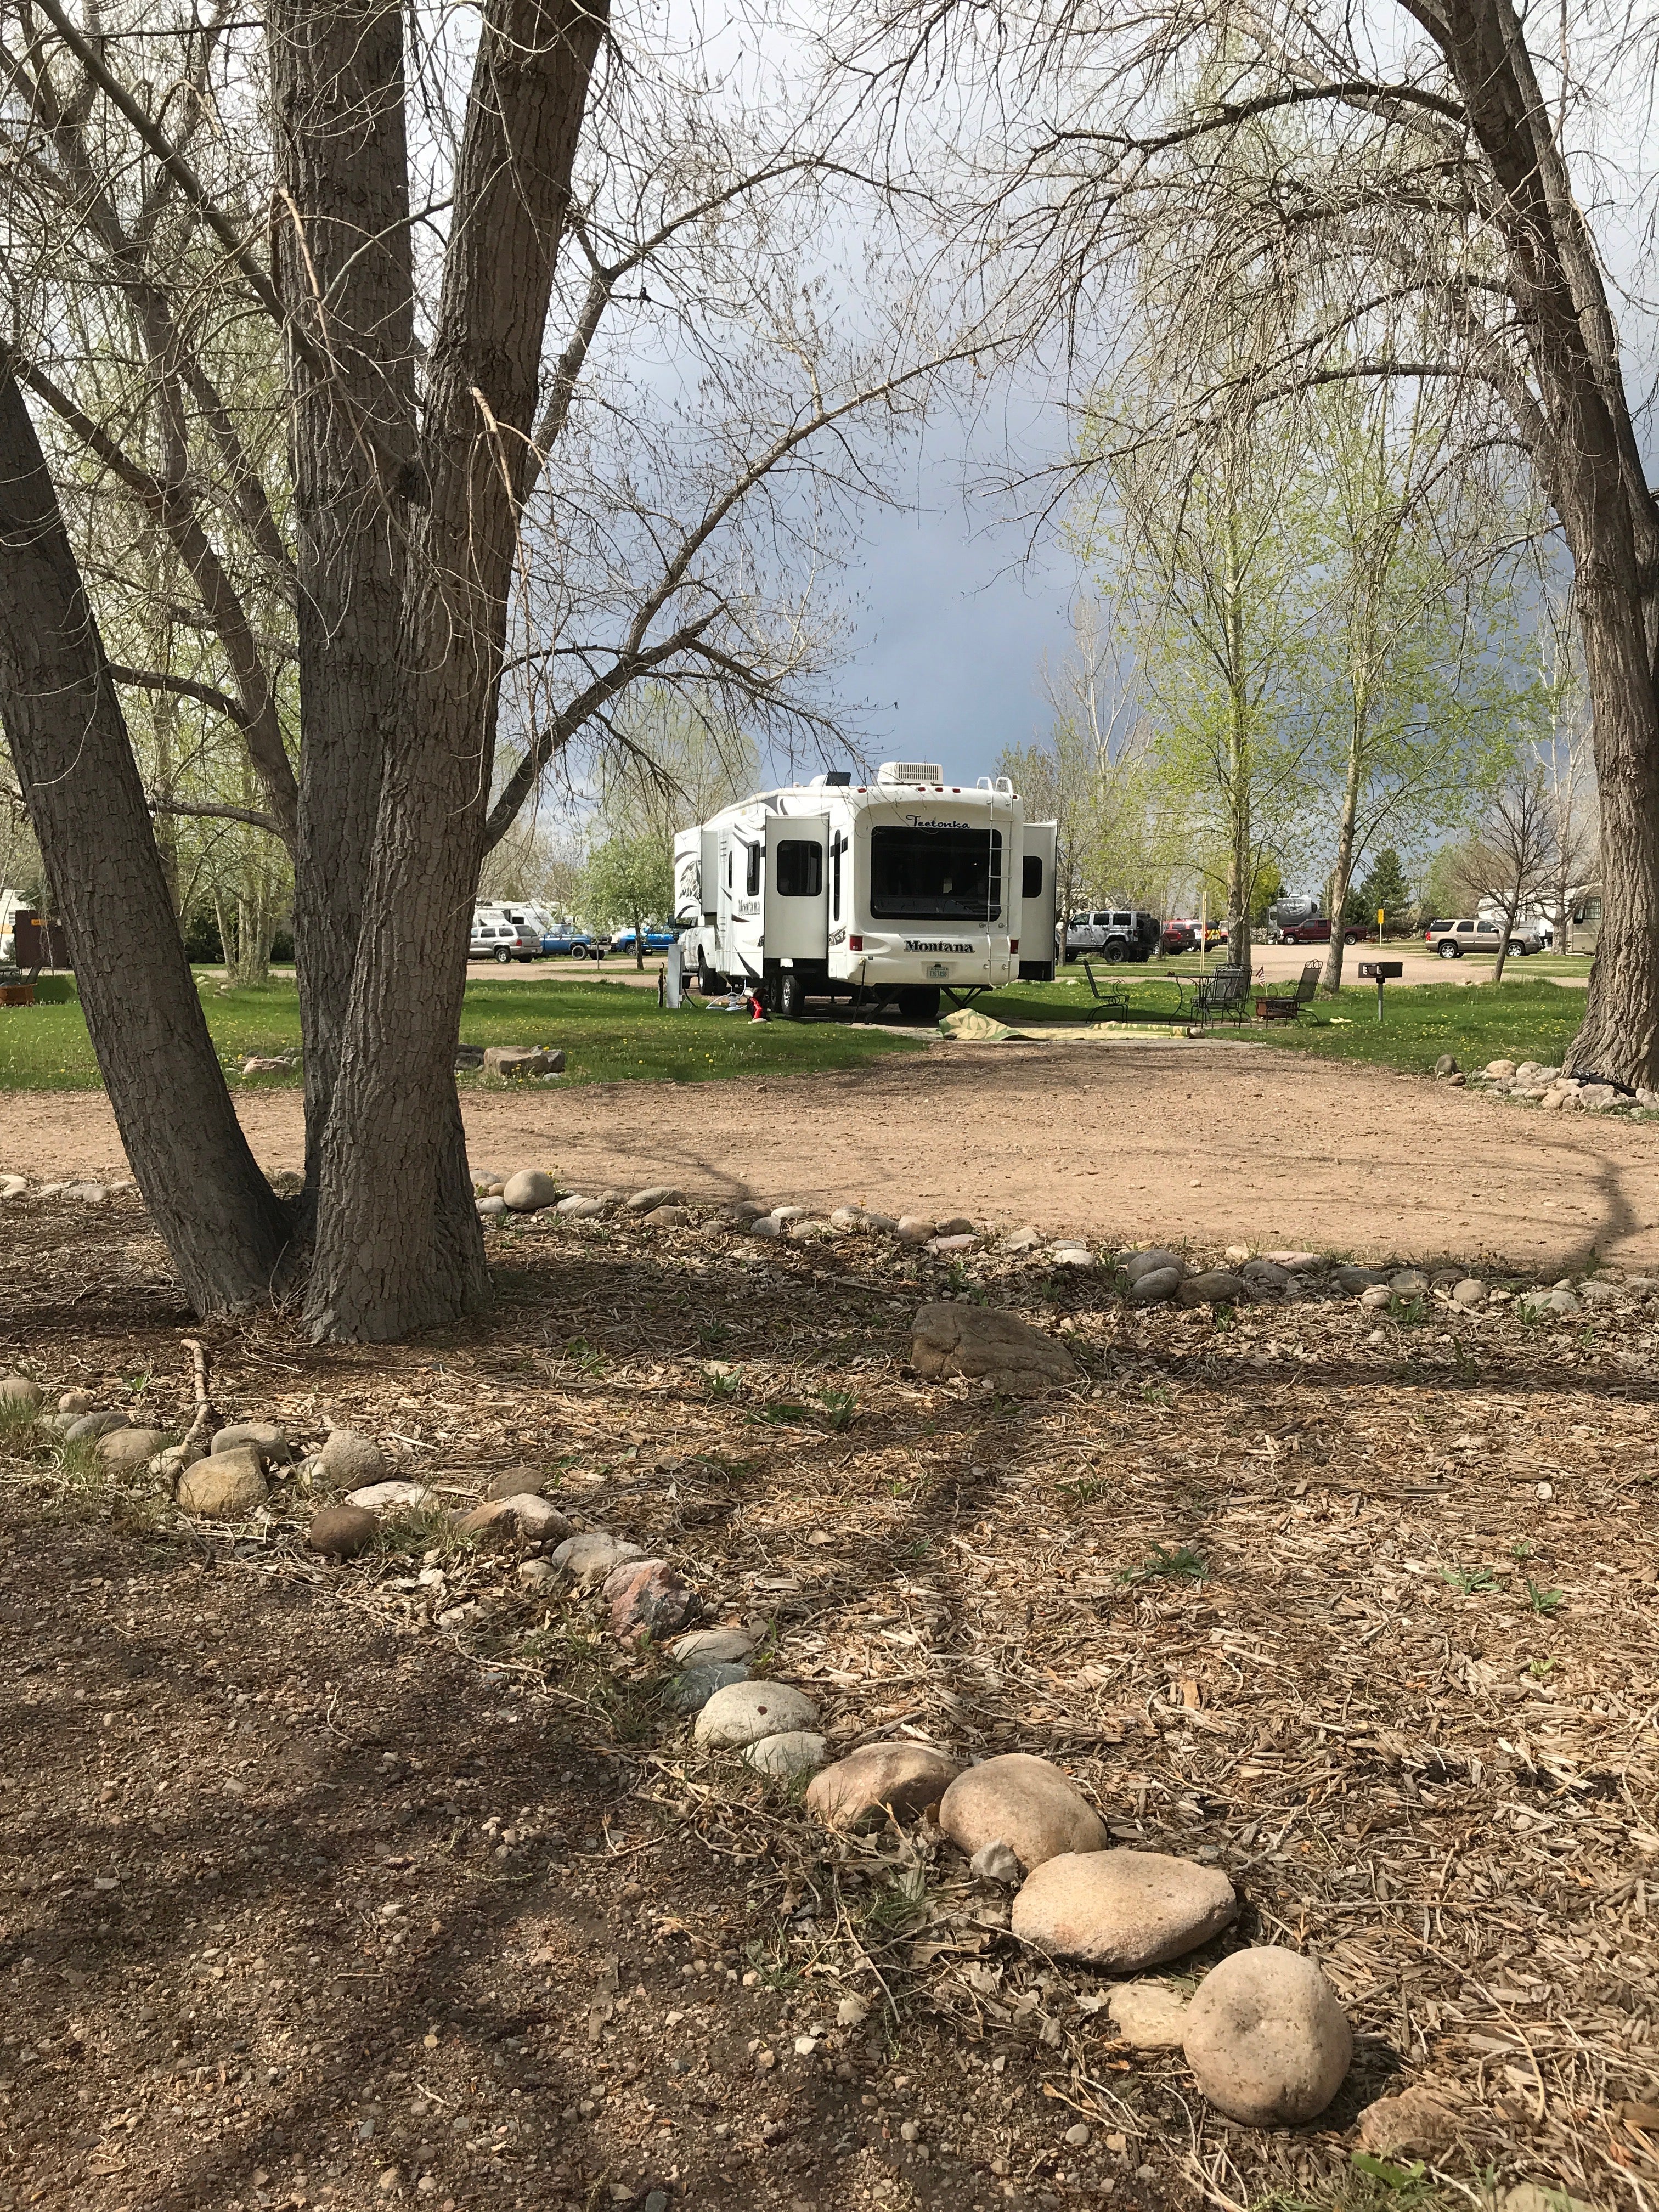 A glimpse of one of the many available RV sites